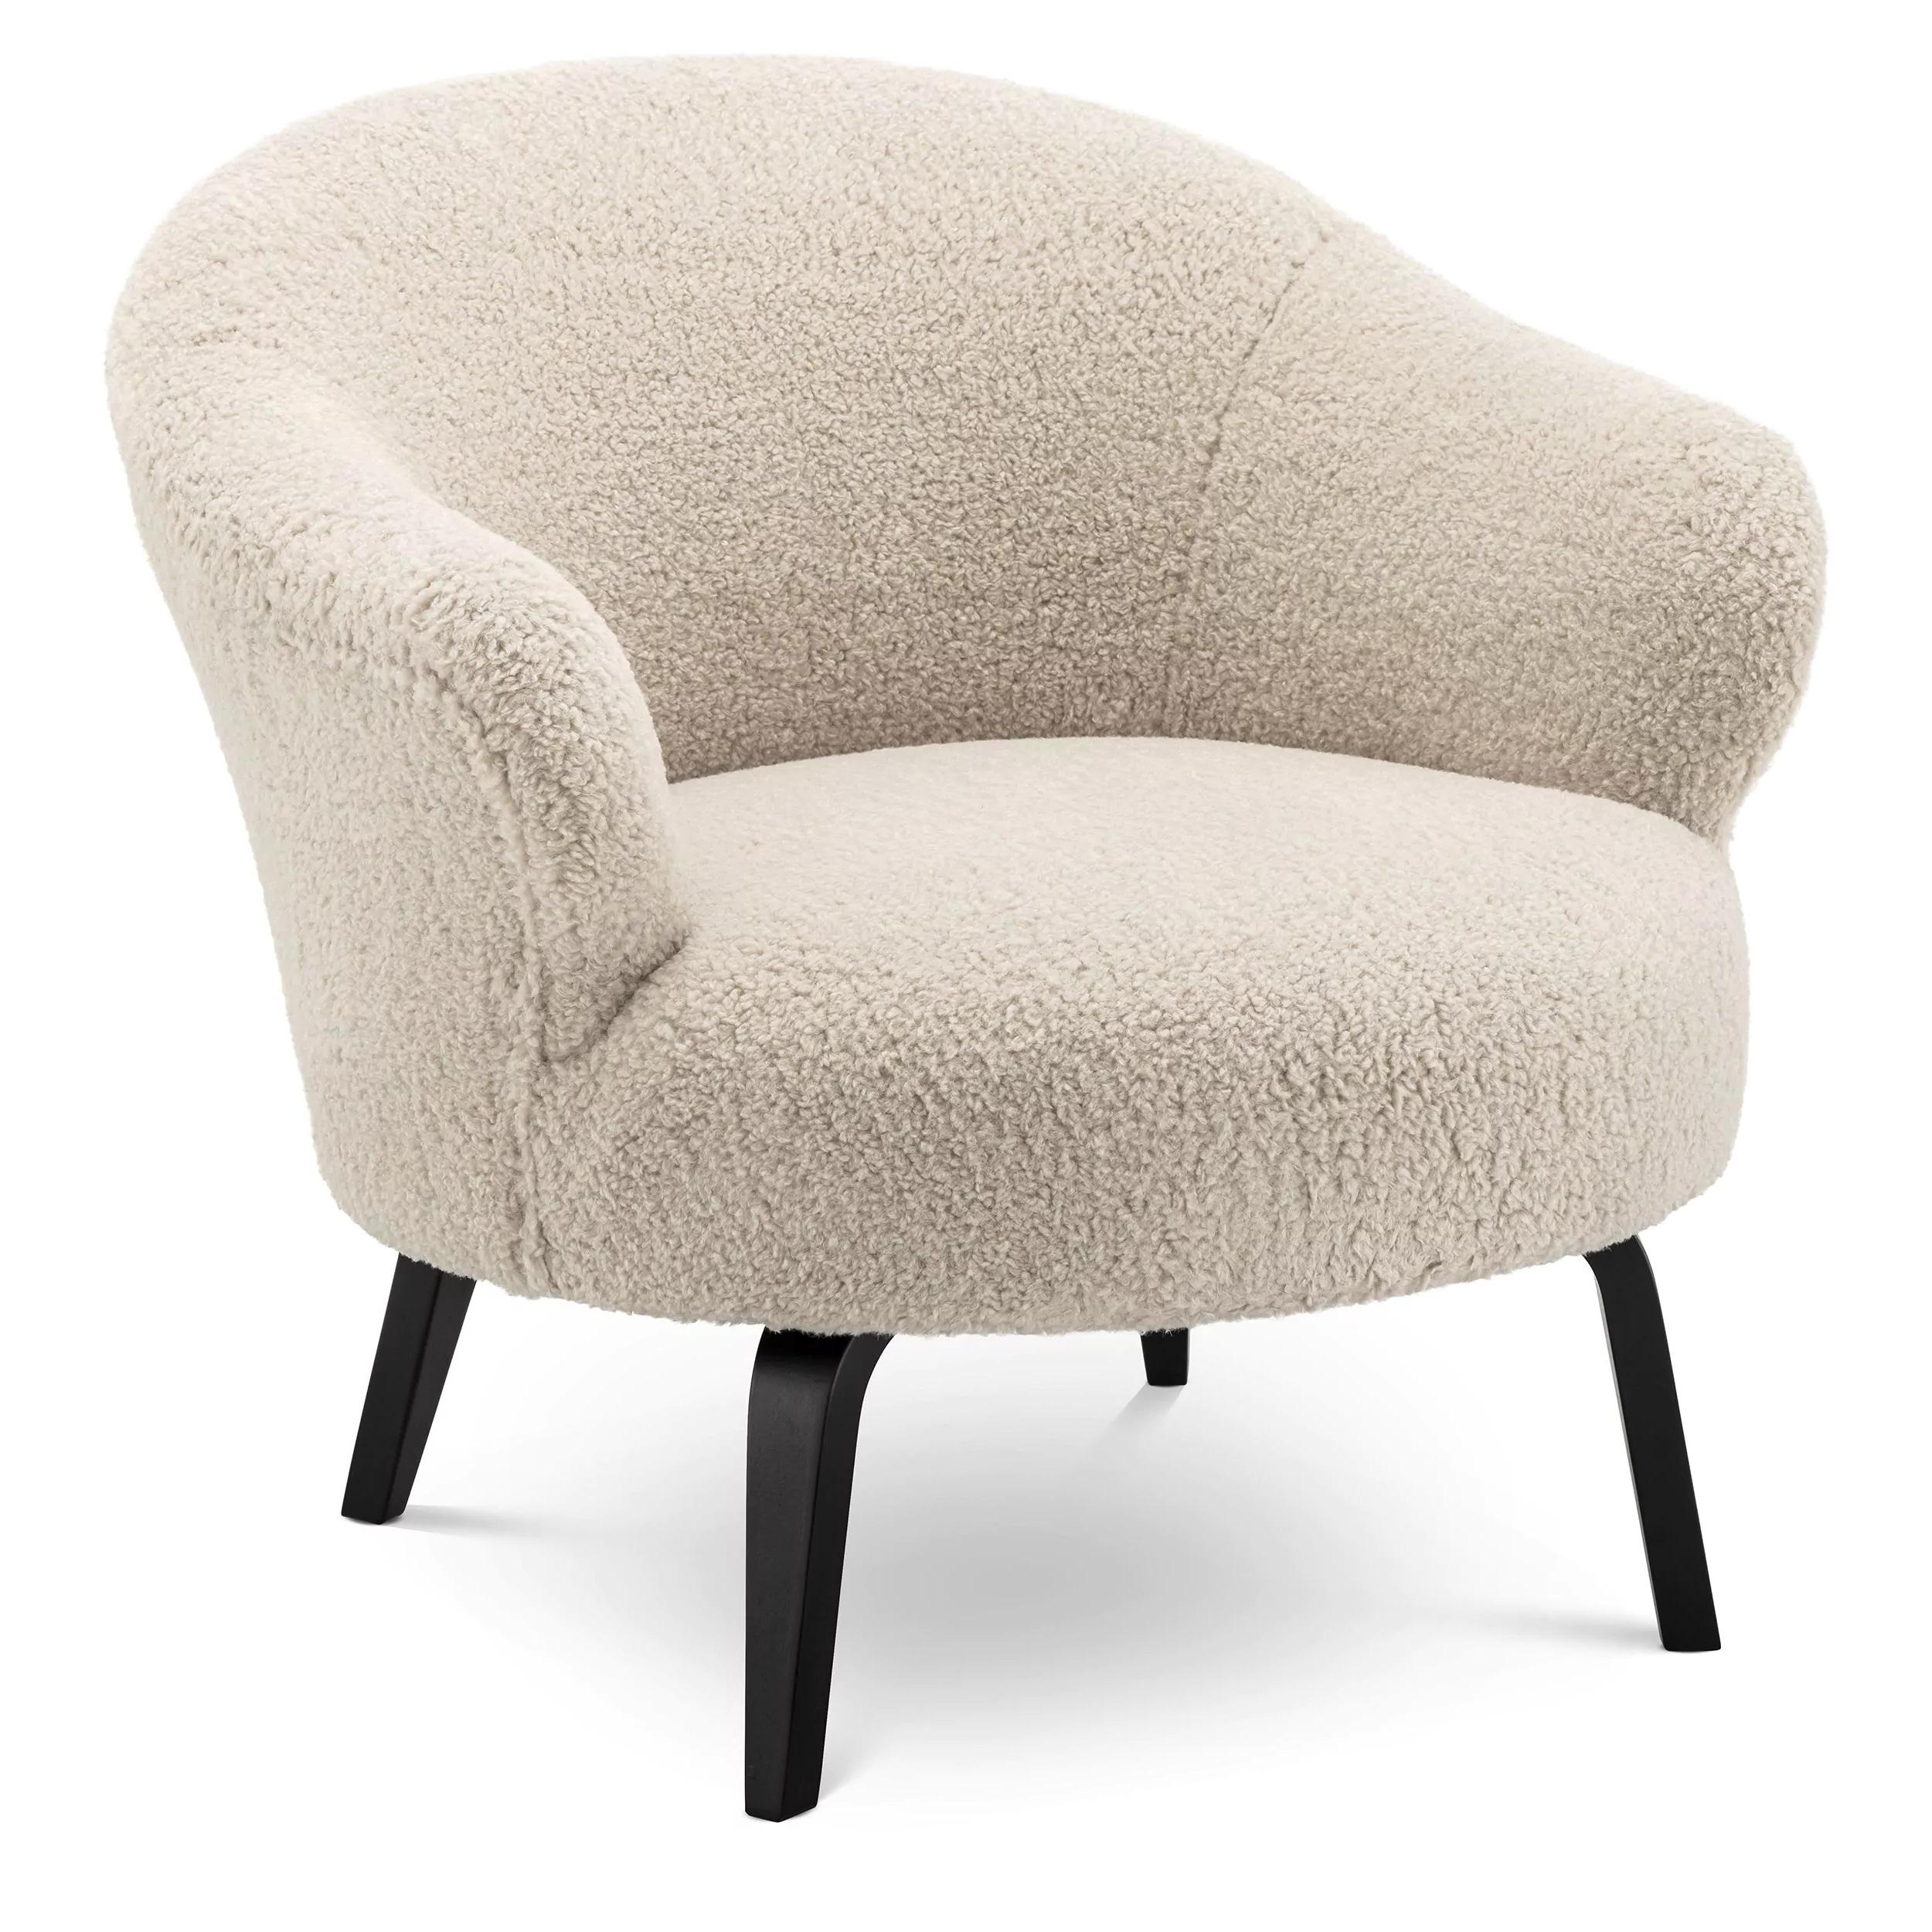 Vintage style and MCM design black wooden feet with beige Bouclé fabric fur effect rounded shaped armchair.